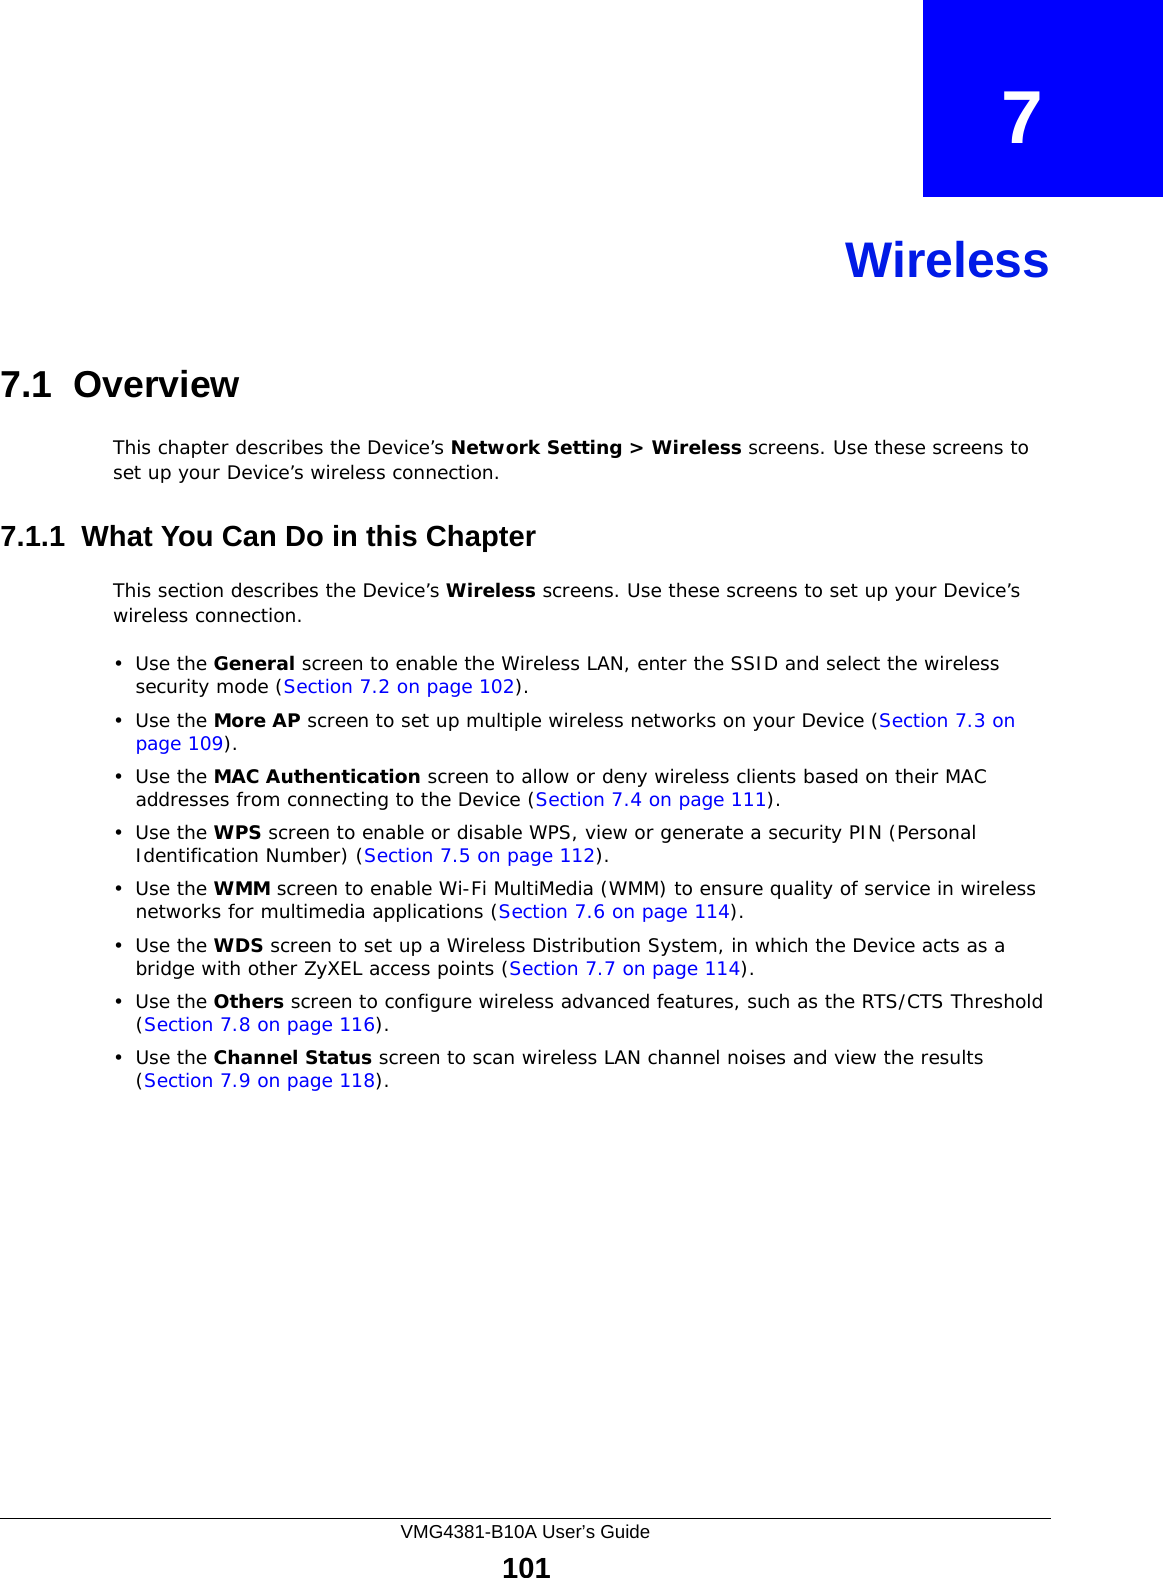 VMG4381-B10A User’s Guide101CHAPTER   7Wireless7.1  Overview This chapter describes the Device’s Network Setting &gt; Wireless screens. Use these screens to set up your Device’s wireless connection.7.1.1  What You Can Do in this ChapterThis section describes the Device’s Wireless screens. Use these screens to set up your Device’s wireless connection.•Use the General screen to enable the Wireless LAN, enter the SSID and select the wireless security mode (Section 7.2 on page 102).•Use the More AP screen to set up multiple wireless networks on your Device (Section 7.3 on page 109).•Use the MAC Authentication screen to allow or deny wireless clients based on their MAC addresses from connecting to the Device (Section 7.4 on page 111).•Use the WPS screen to enable or disable WPS, view or generate a security PIN (Personal Identification Number) (Section 7.5 on page 112).•Use the WMM screen to enable Wi-Fi MultiMedia (WMM) to ensure quality of service in wireless networks for multimedia applications (Section 7.6 on page 114). •Use the WDS screen to set up a Wireless Distribution System, in which the Device acts as a bridge with other ZyXEL access points (Section 7.7 on page 114).•Use the Others screen to configure wireless advanced features, such as the RTS/CTS Threshold (Section 7.8 on page 116).•Use the Channel Status screen to scan wireless LAN channel noises and view the results (Section 7.9 on page 118).